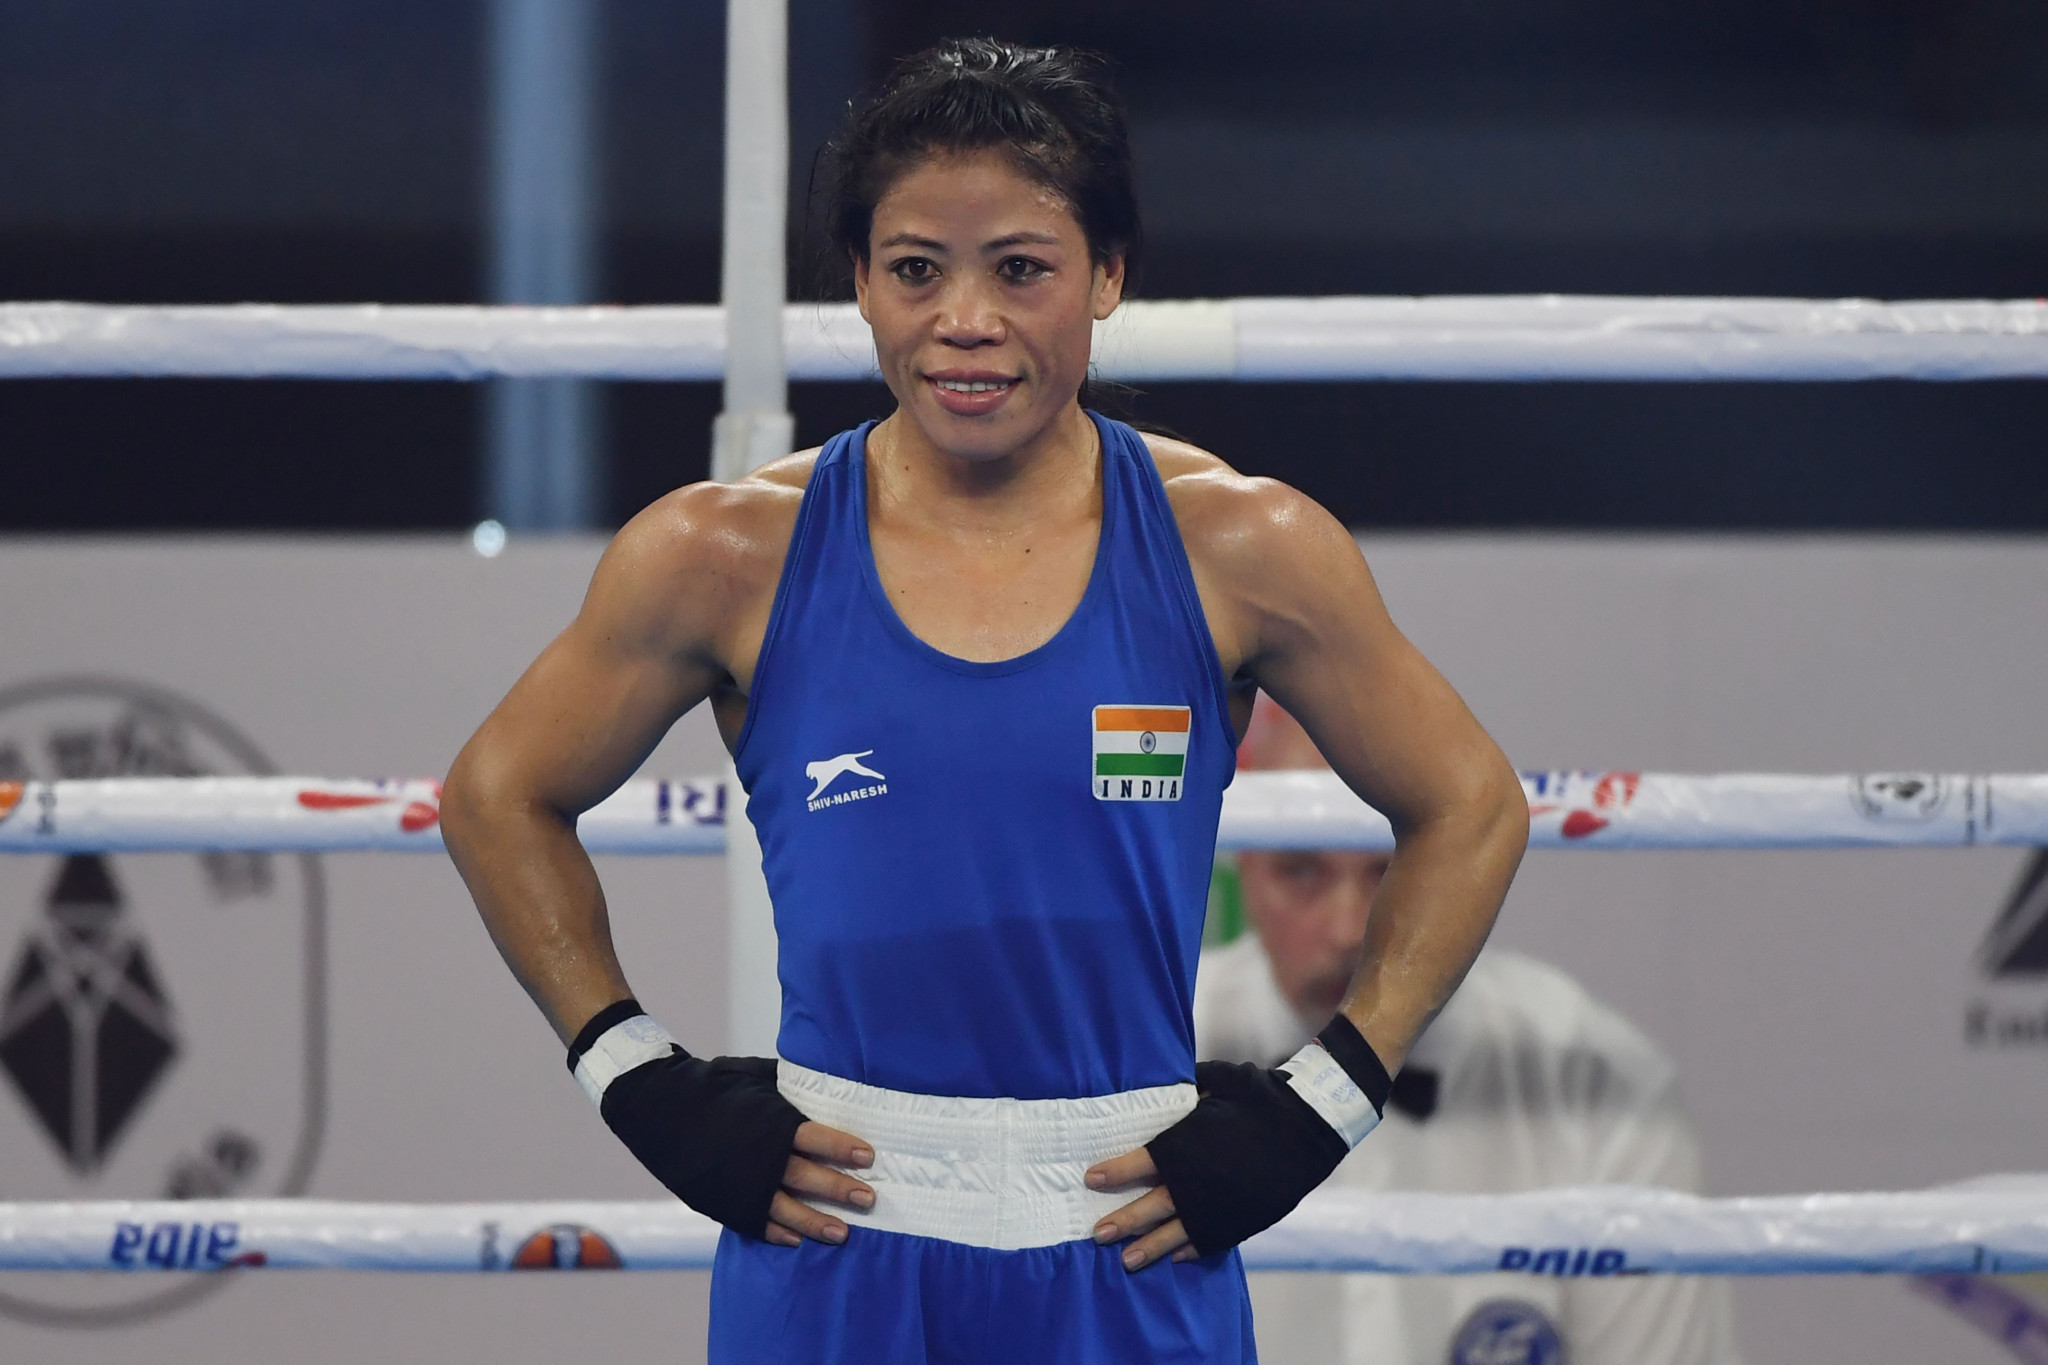 Olympic boxing medallist appointed to chair Oversight Committee investigating Wrestling Federation of India